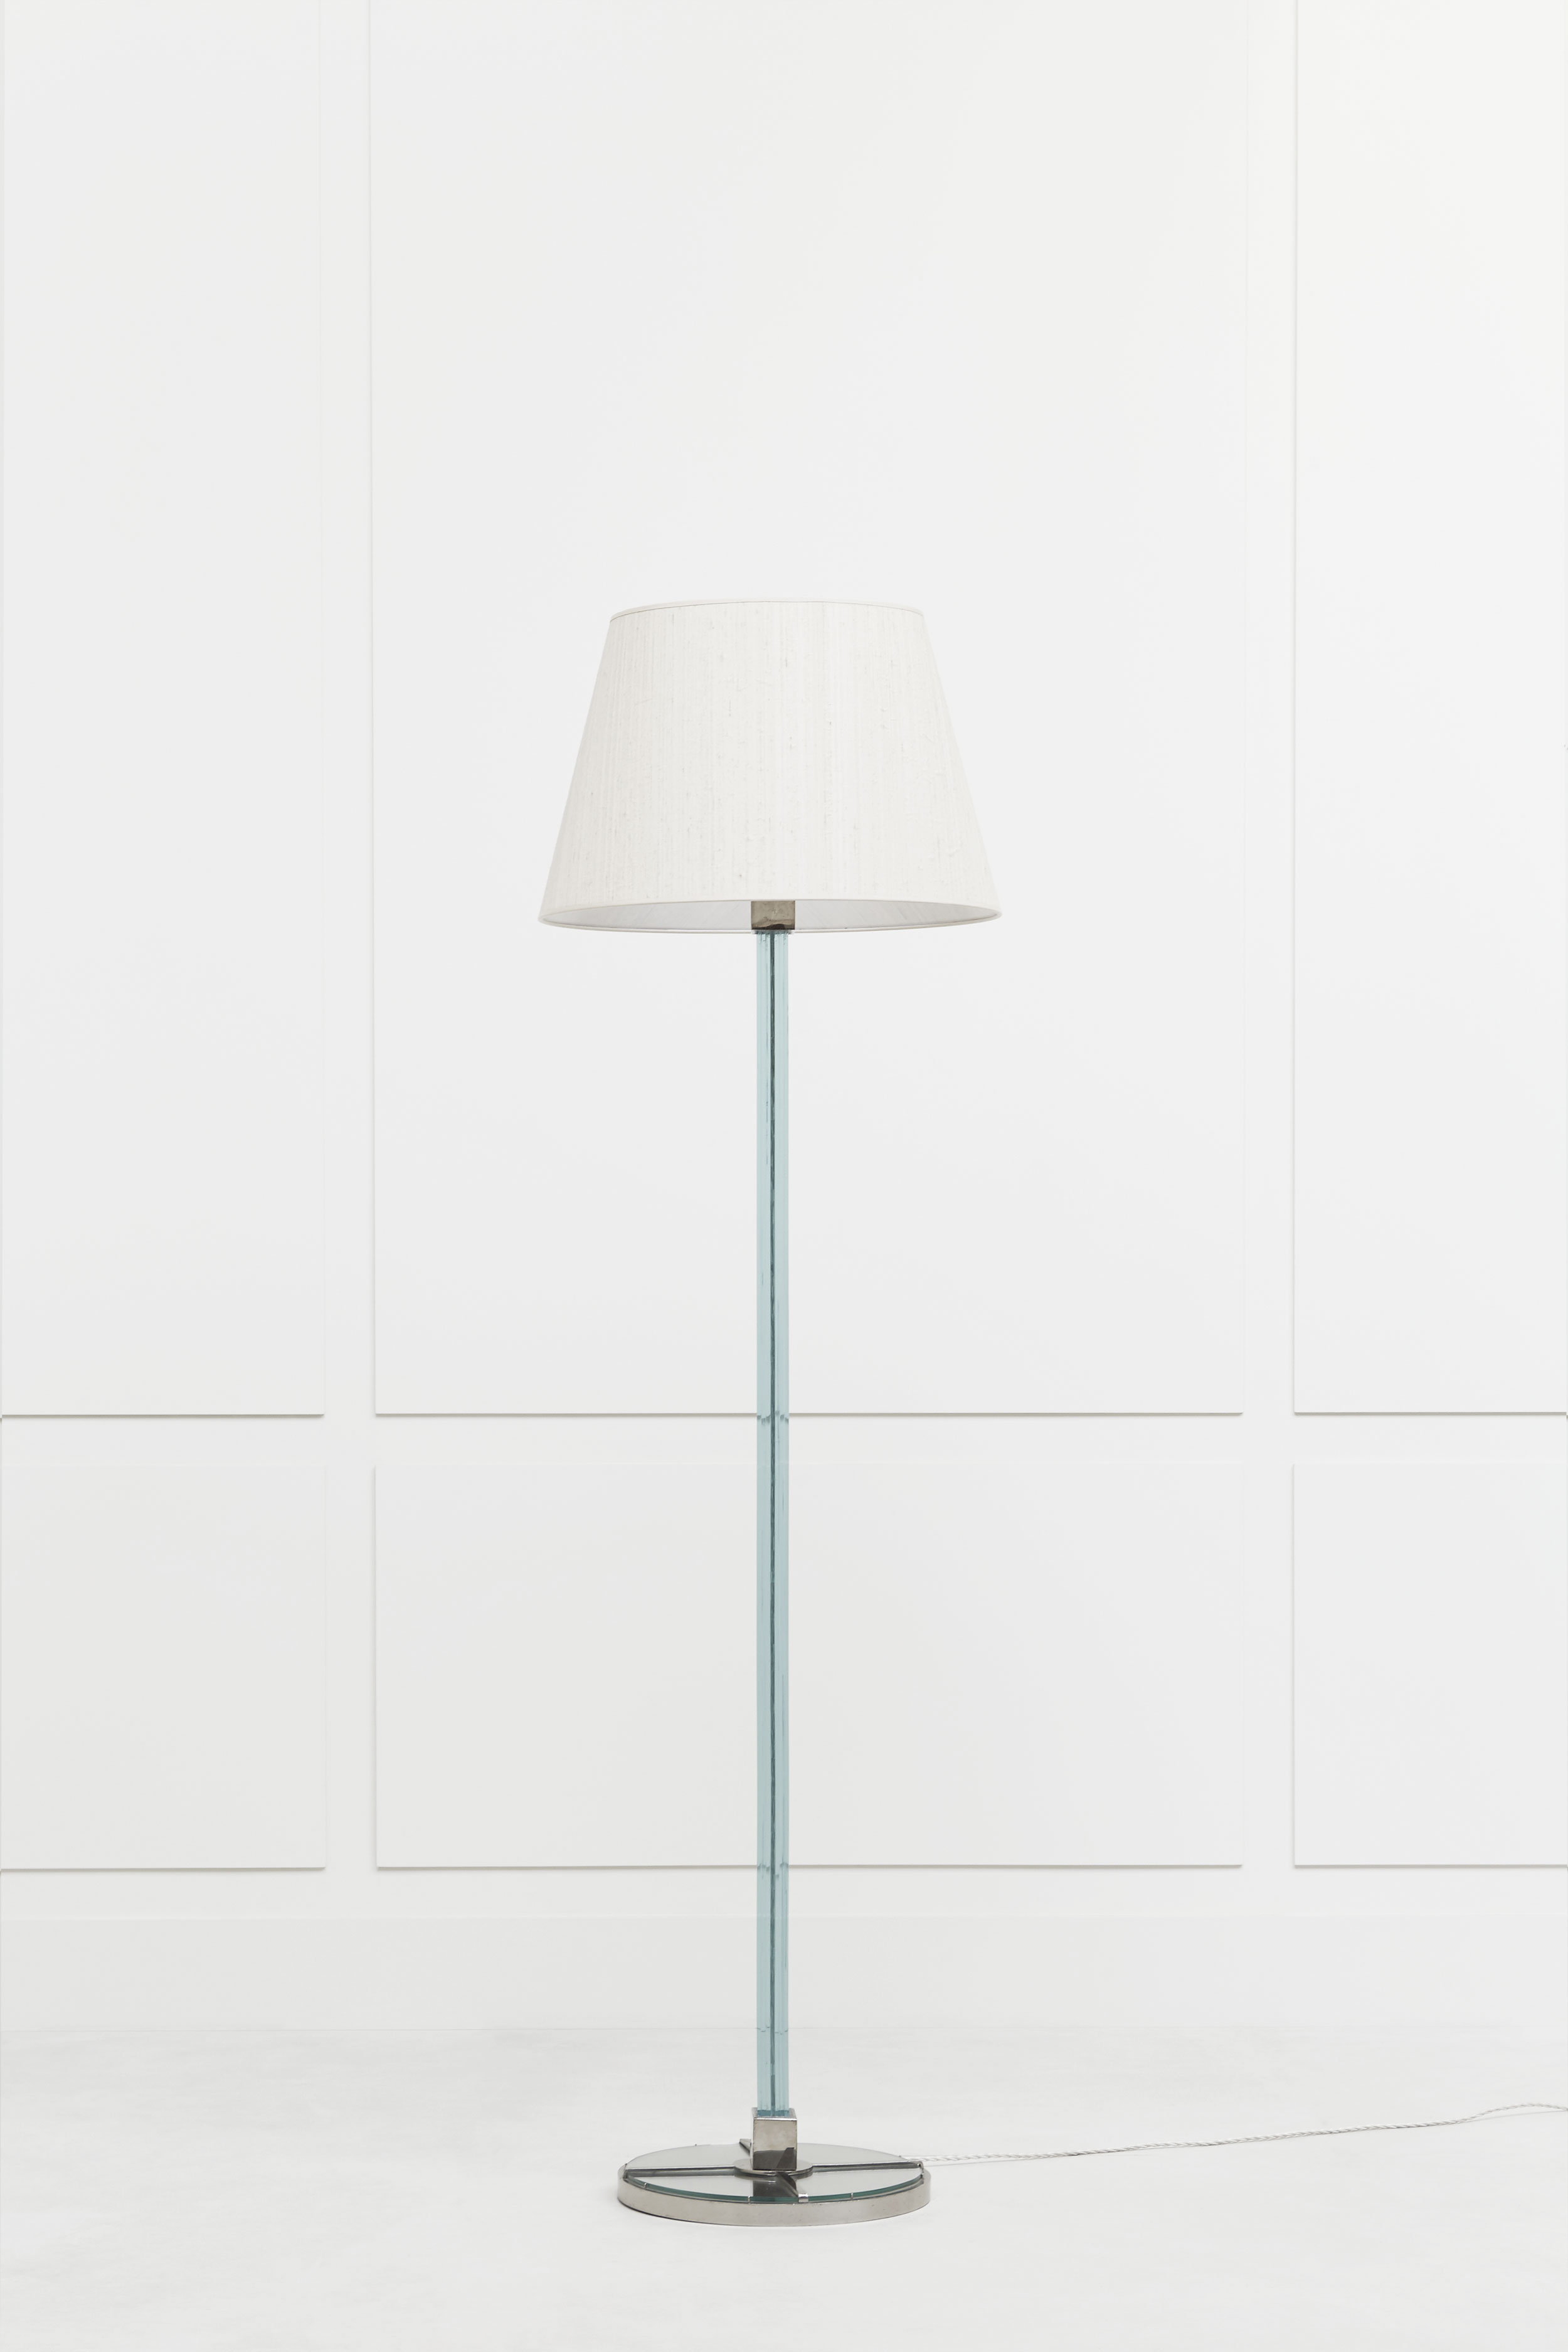 Syrie Maugham, Lampadaire, vue 02